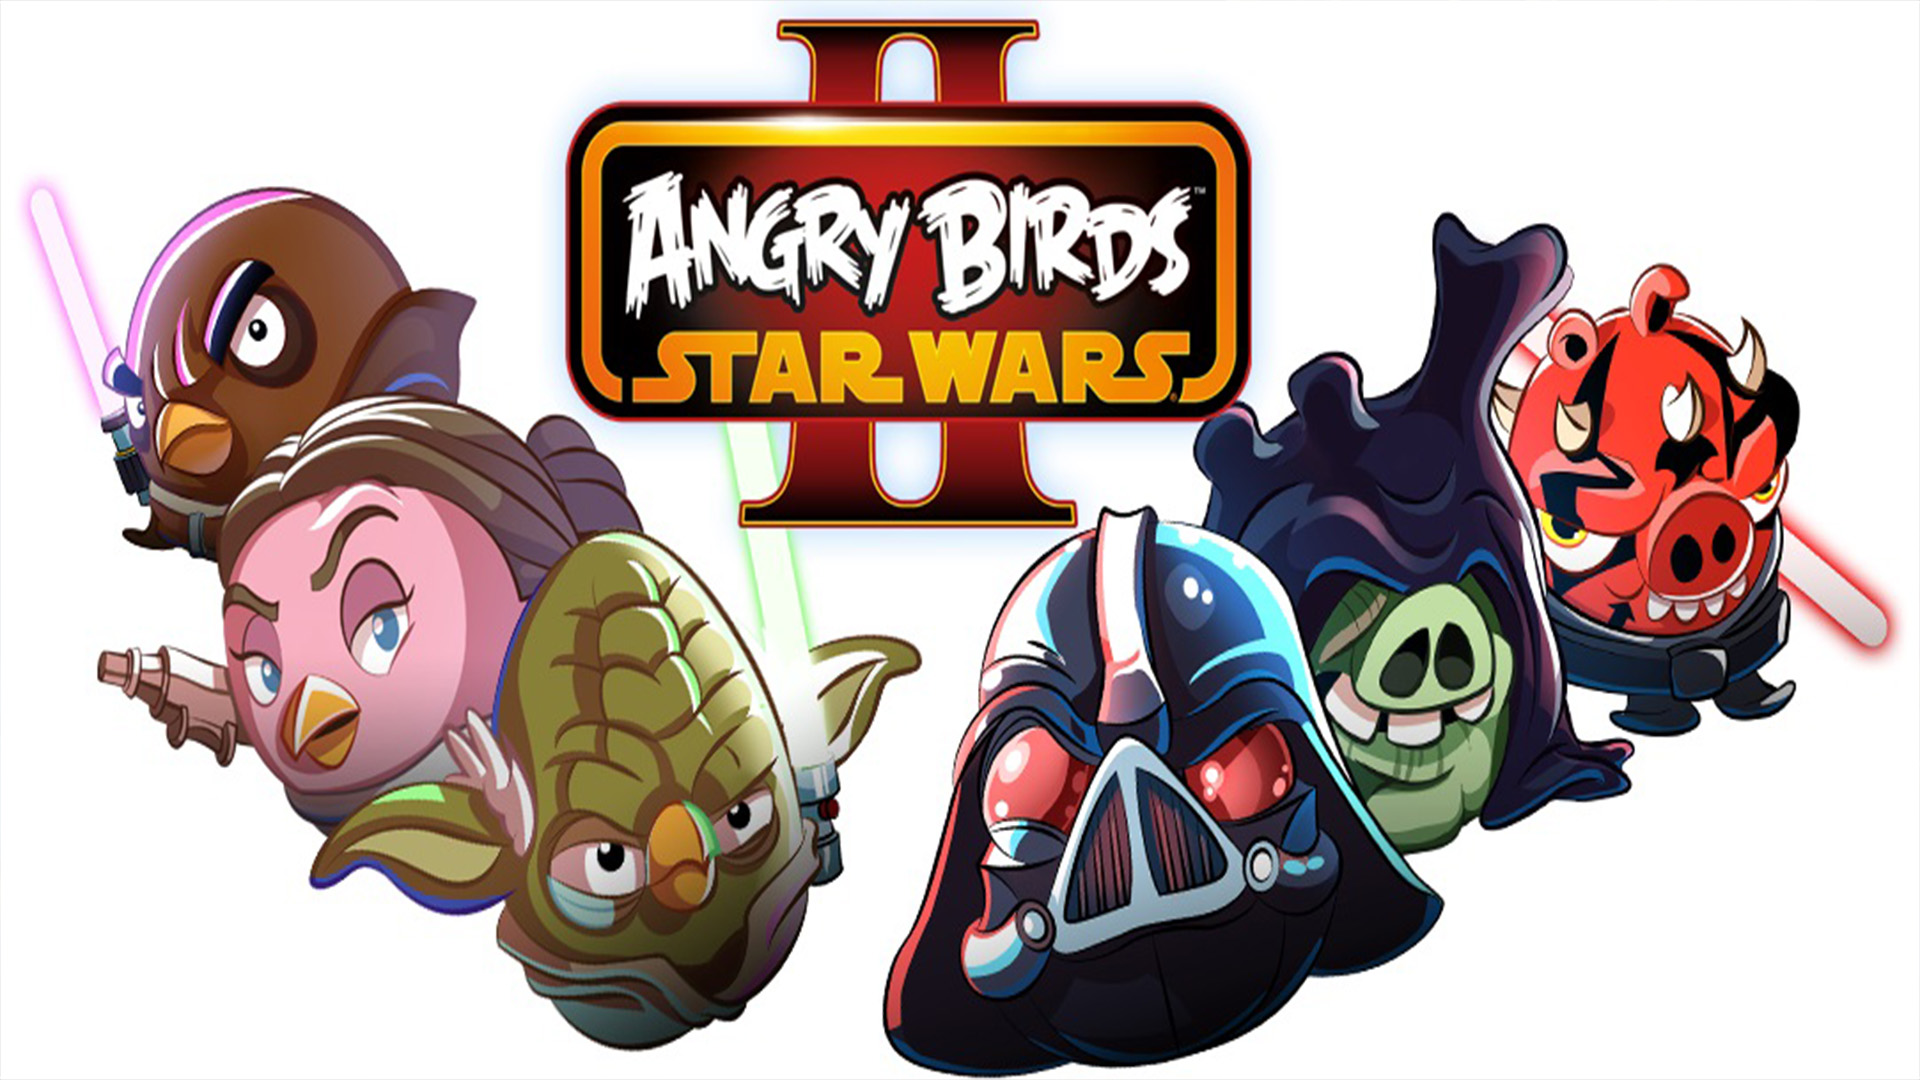 Video Game Angry Birds: Star Wars 2 HD Wallpaper | Background Image